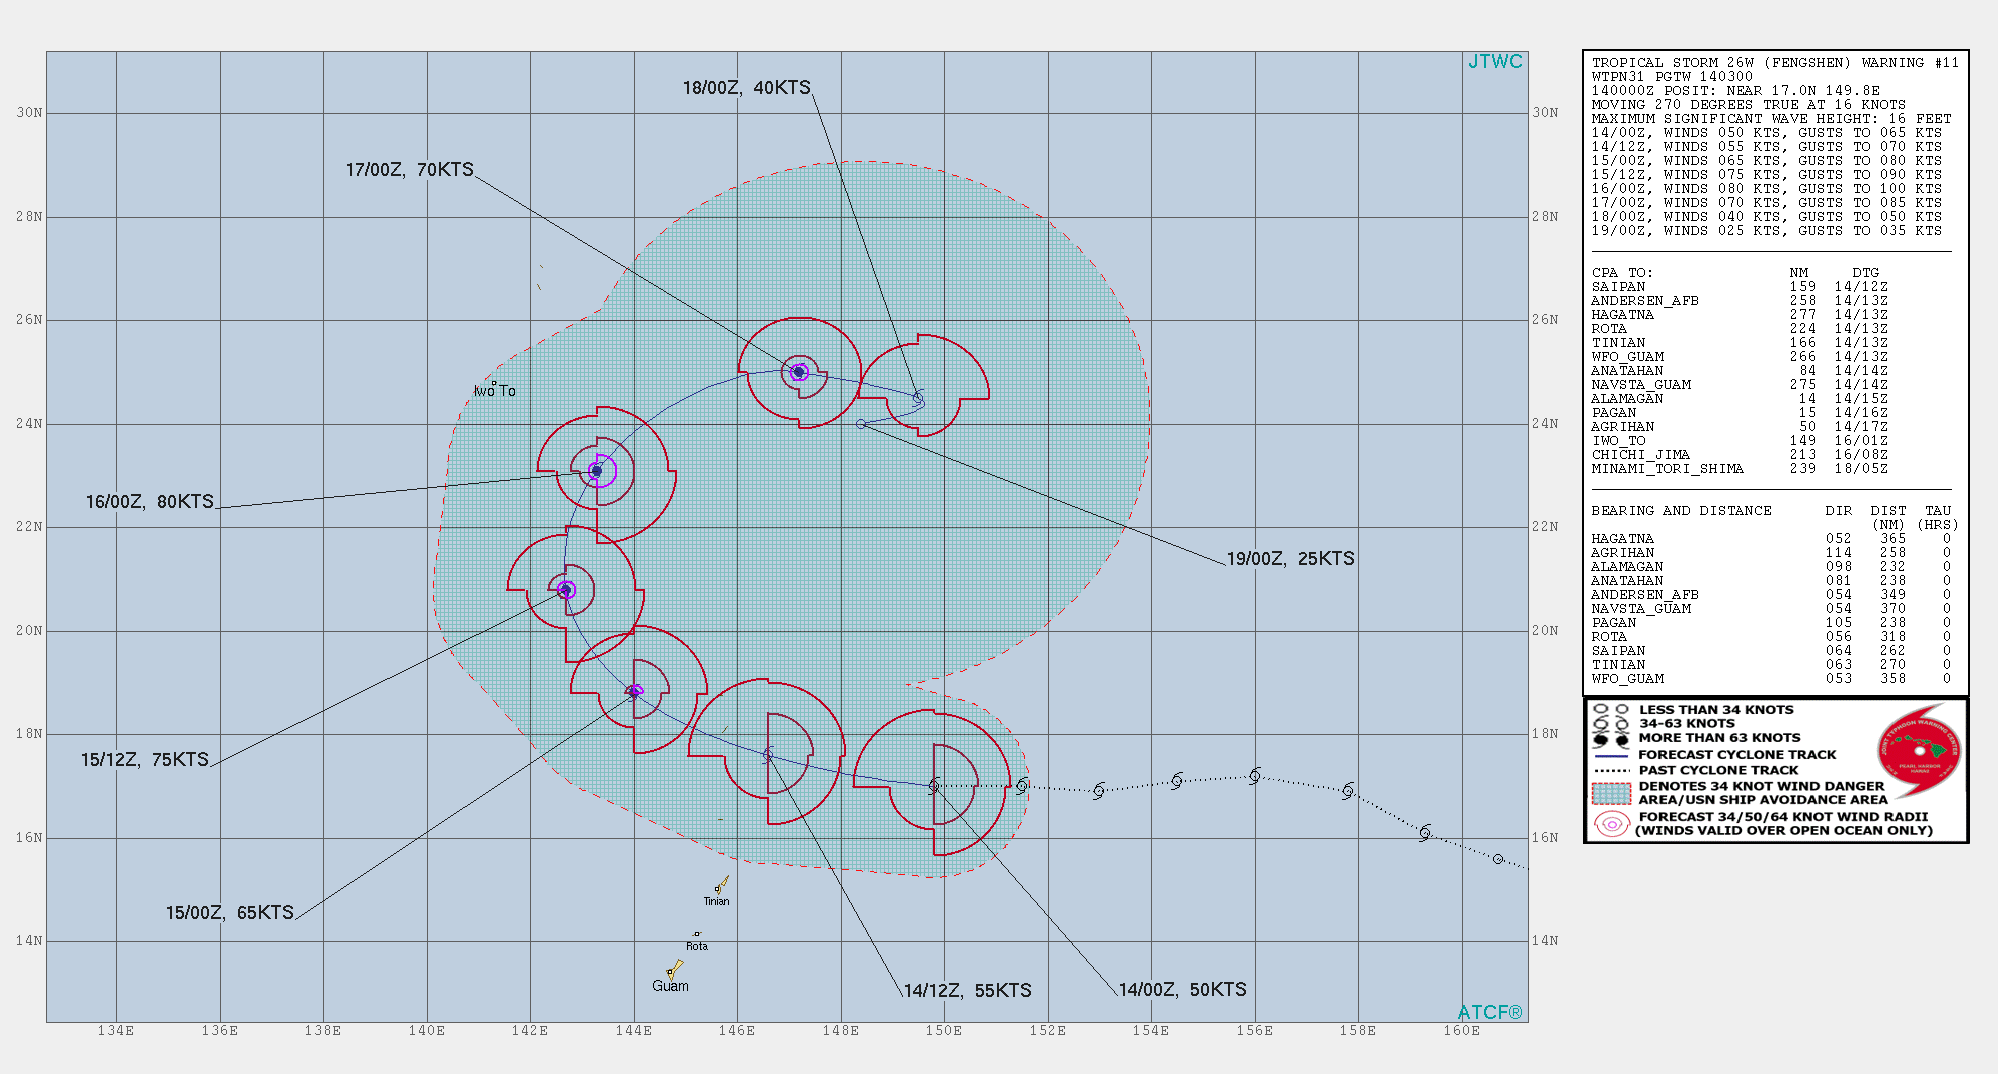 TS 26W: FORECAST TO REACH TYPHOON INTENSITY IN 24H